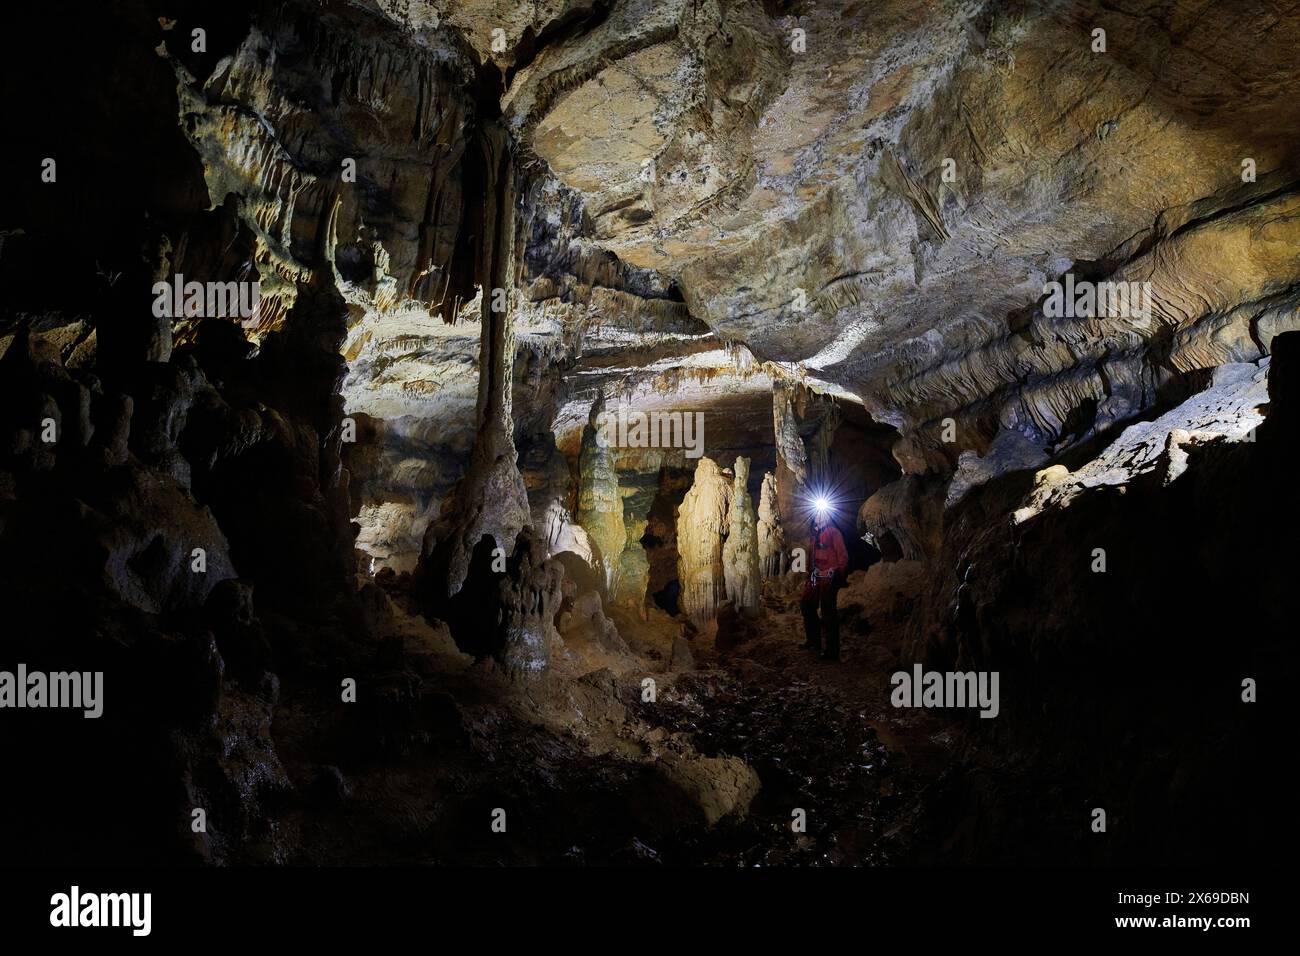 Speleologist in a cave, column, stalagmites and stalactites, stone forest Stock Photo